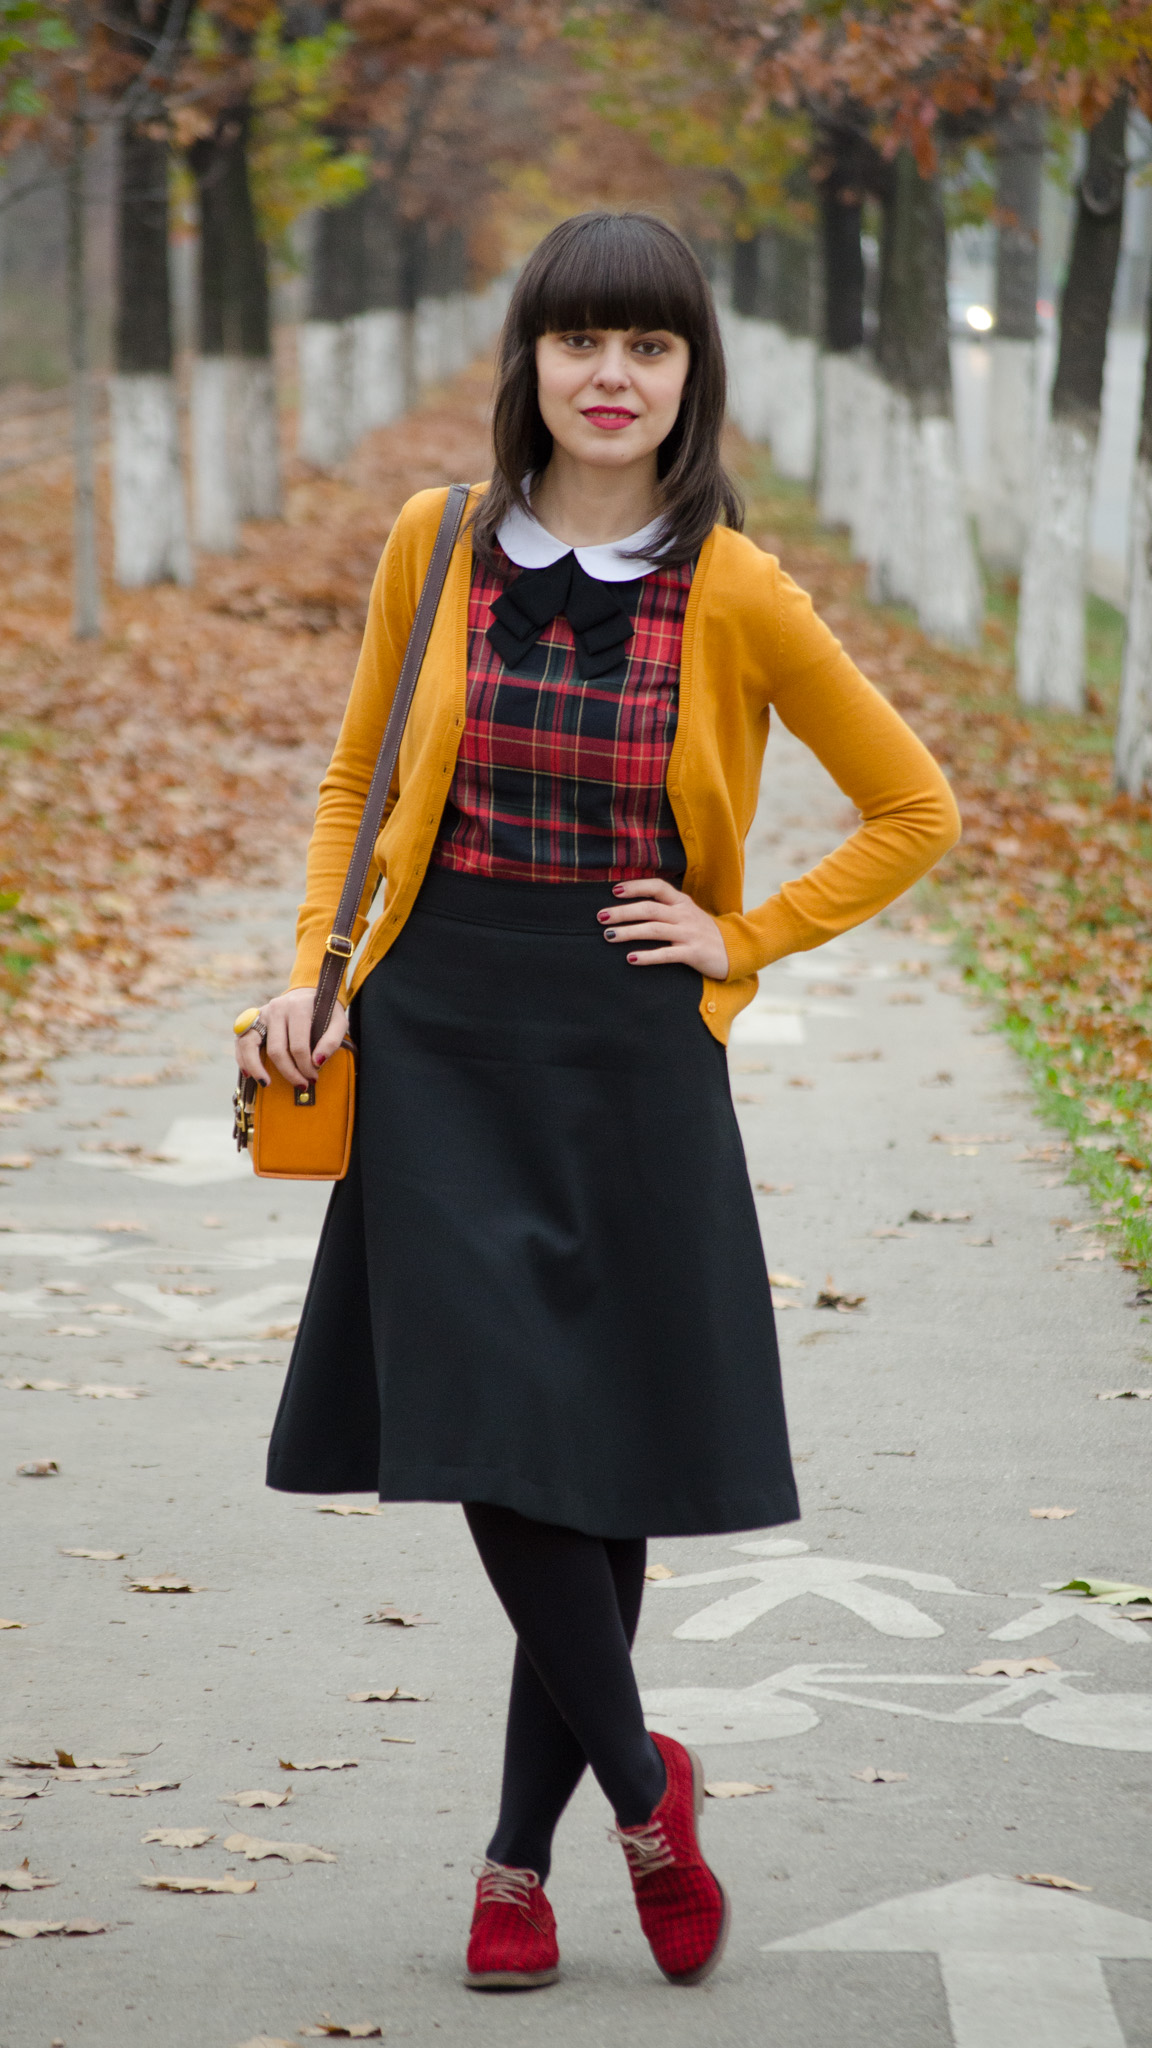 houndstooth oxfrod shoes mustard sweater tartan shirt peter pan collar black a-line skirt fall leaves school outfit bow